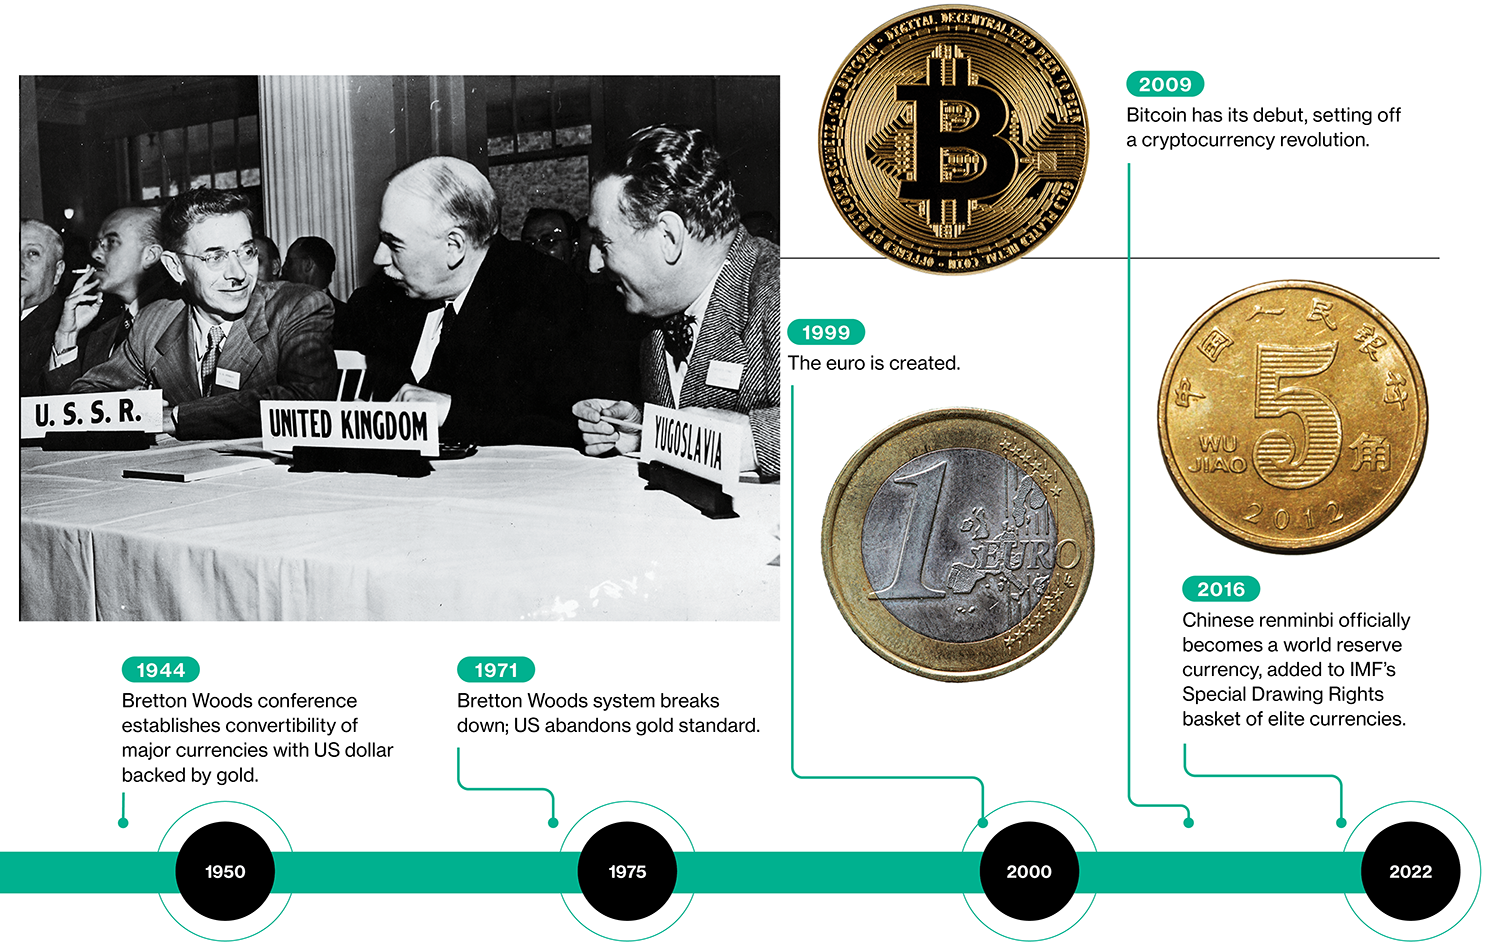 timeline of the history of money, pt 4